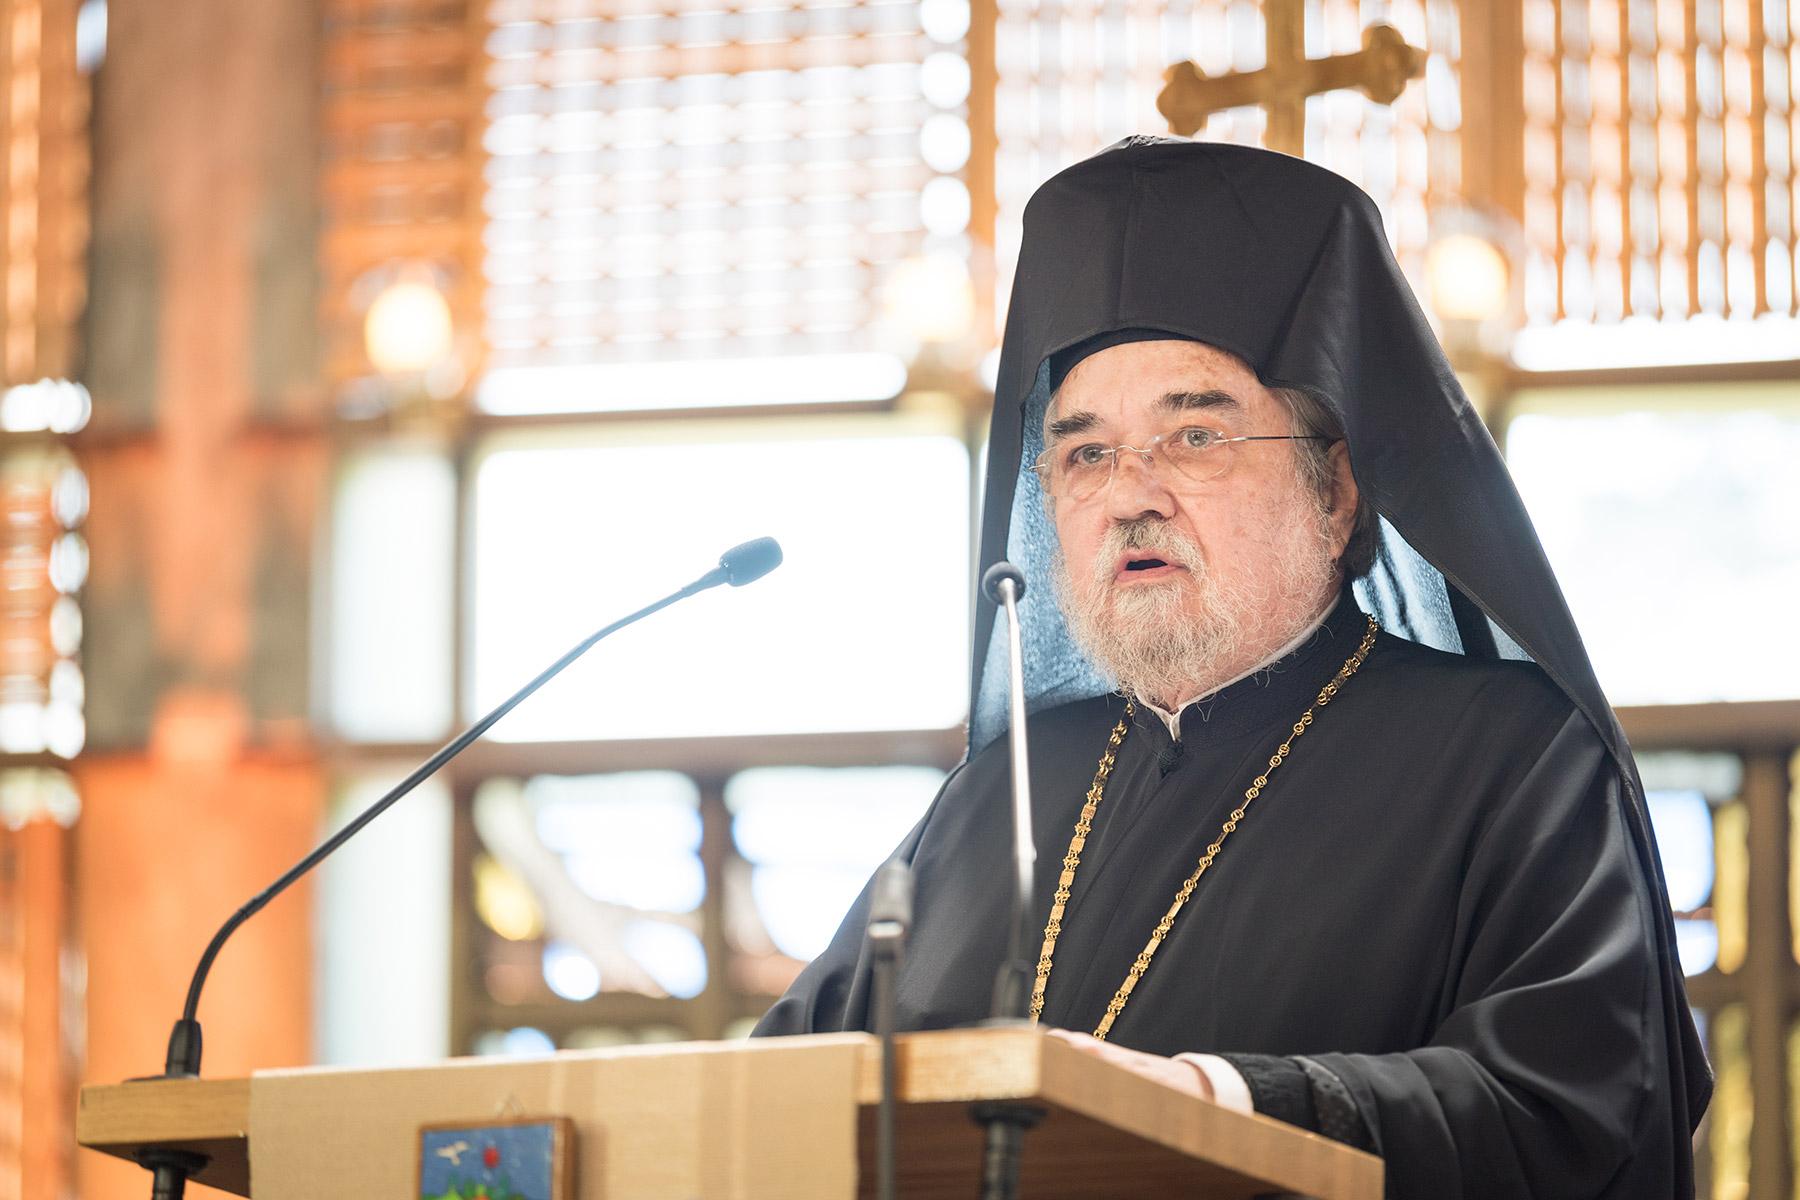 As Vice-Moderator of the WCC Central Committee, Metropolitan Gennadios spoke at an ecumenical prayer service during the 2018 visit of Pope Francis to the WCC. Photo: Albin Hillert/WCC